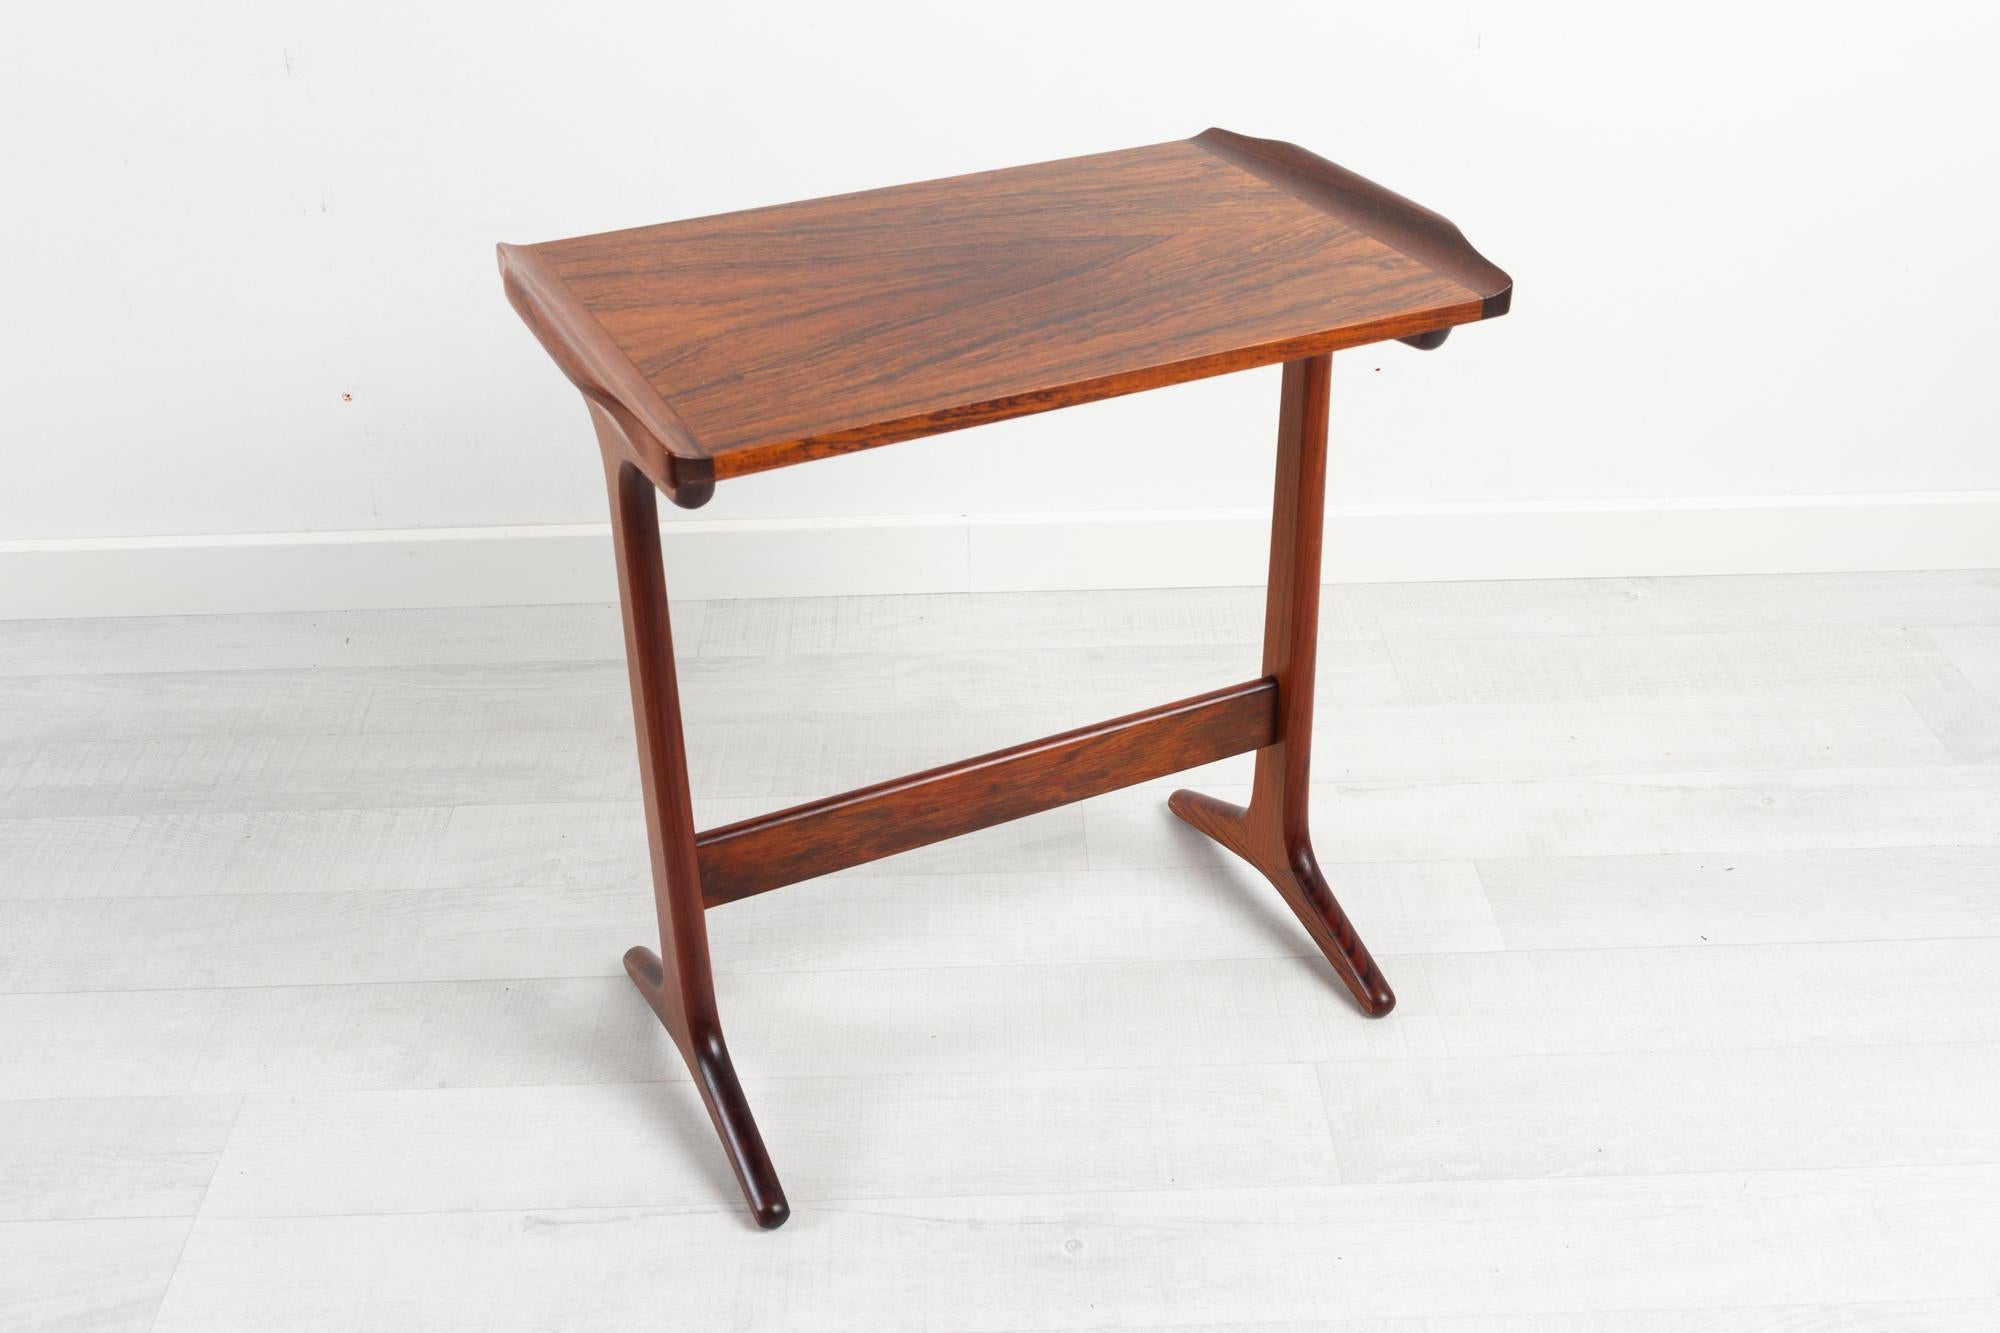 Vintage Danish rosewood side table by Heltborg 1960s
Small Danish Mid-Century Modern side table designed by Erling Torvits for Helt Møbelfabrik, Denmark in the 1960s.
Elegant and versatile table with beautiful expressive grain pattern. Table top